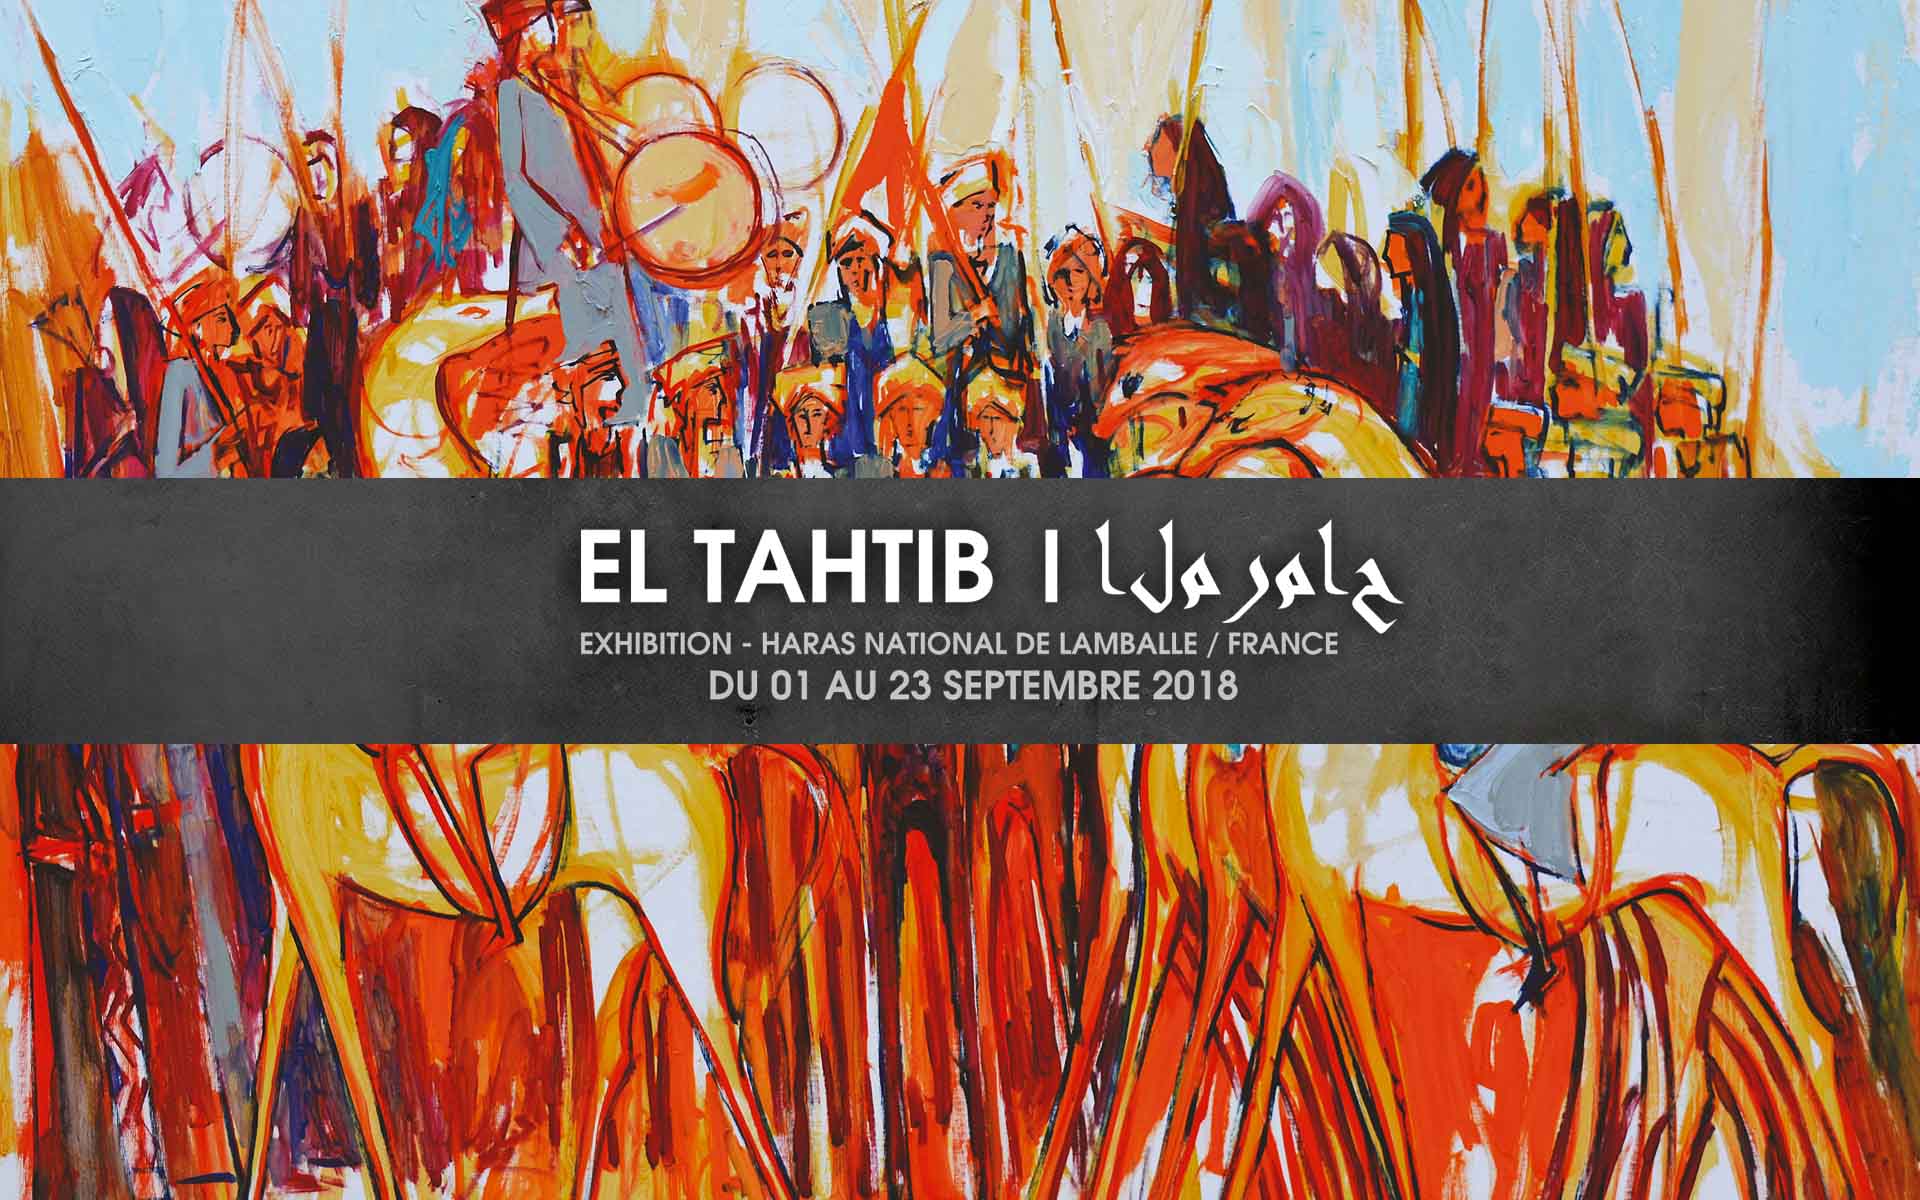 From 01 to 23 September 2018, he has the Exhibition "EL TAHTIB" in Haras National de Lamballe - France.